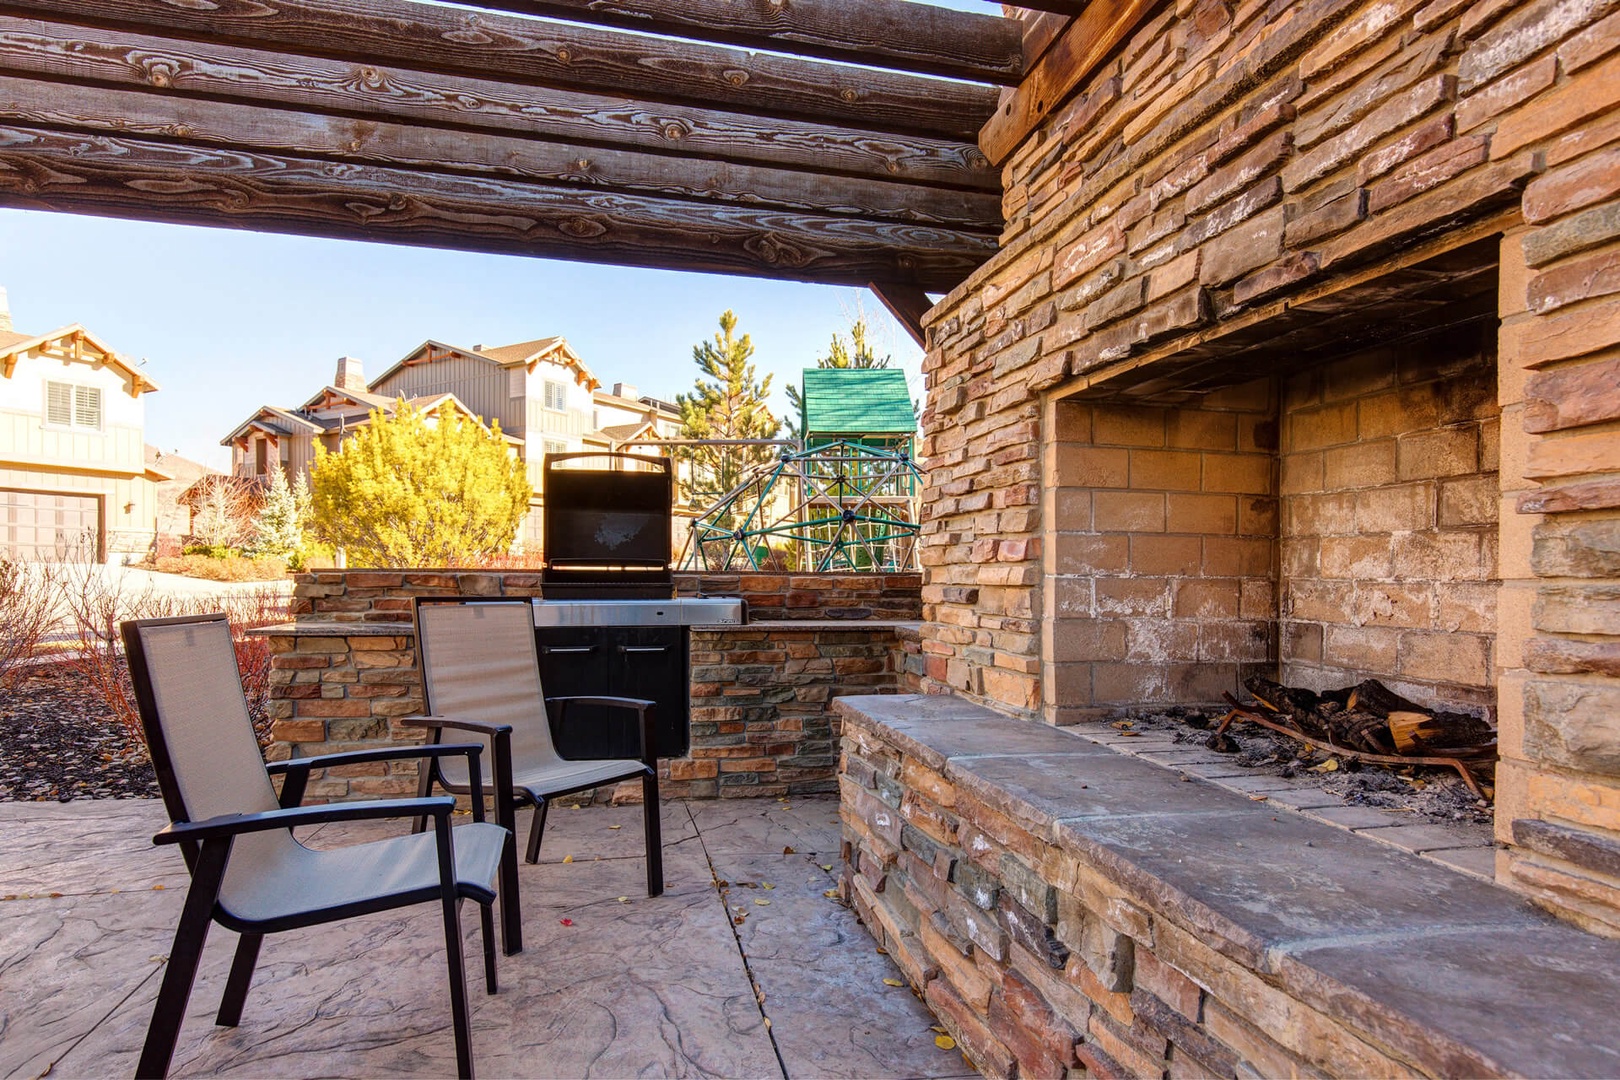 Retreat at Jordanelle Outdoor Fireplace and BBQ Area